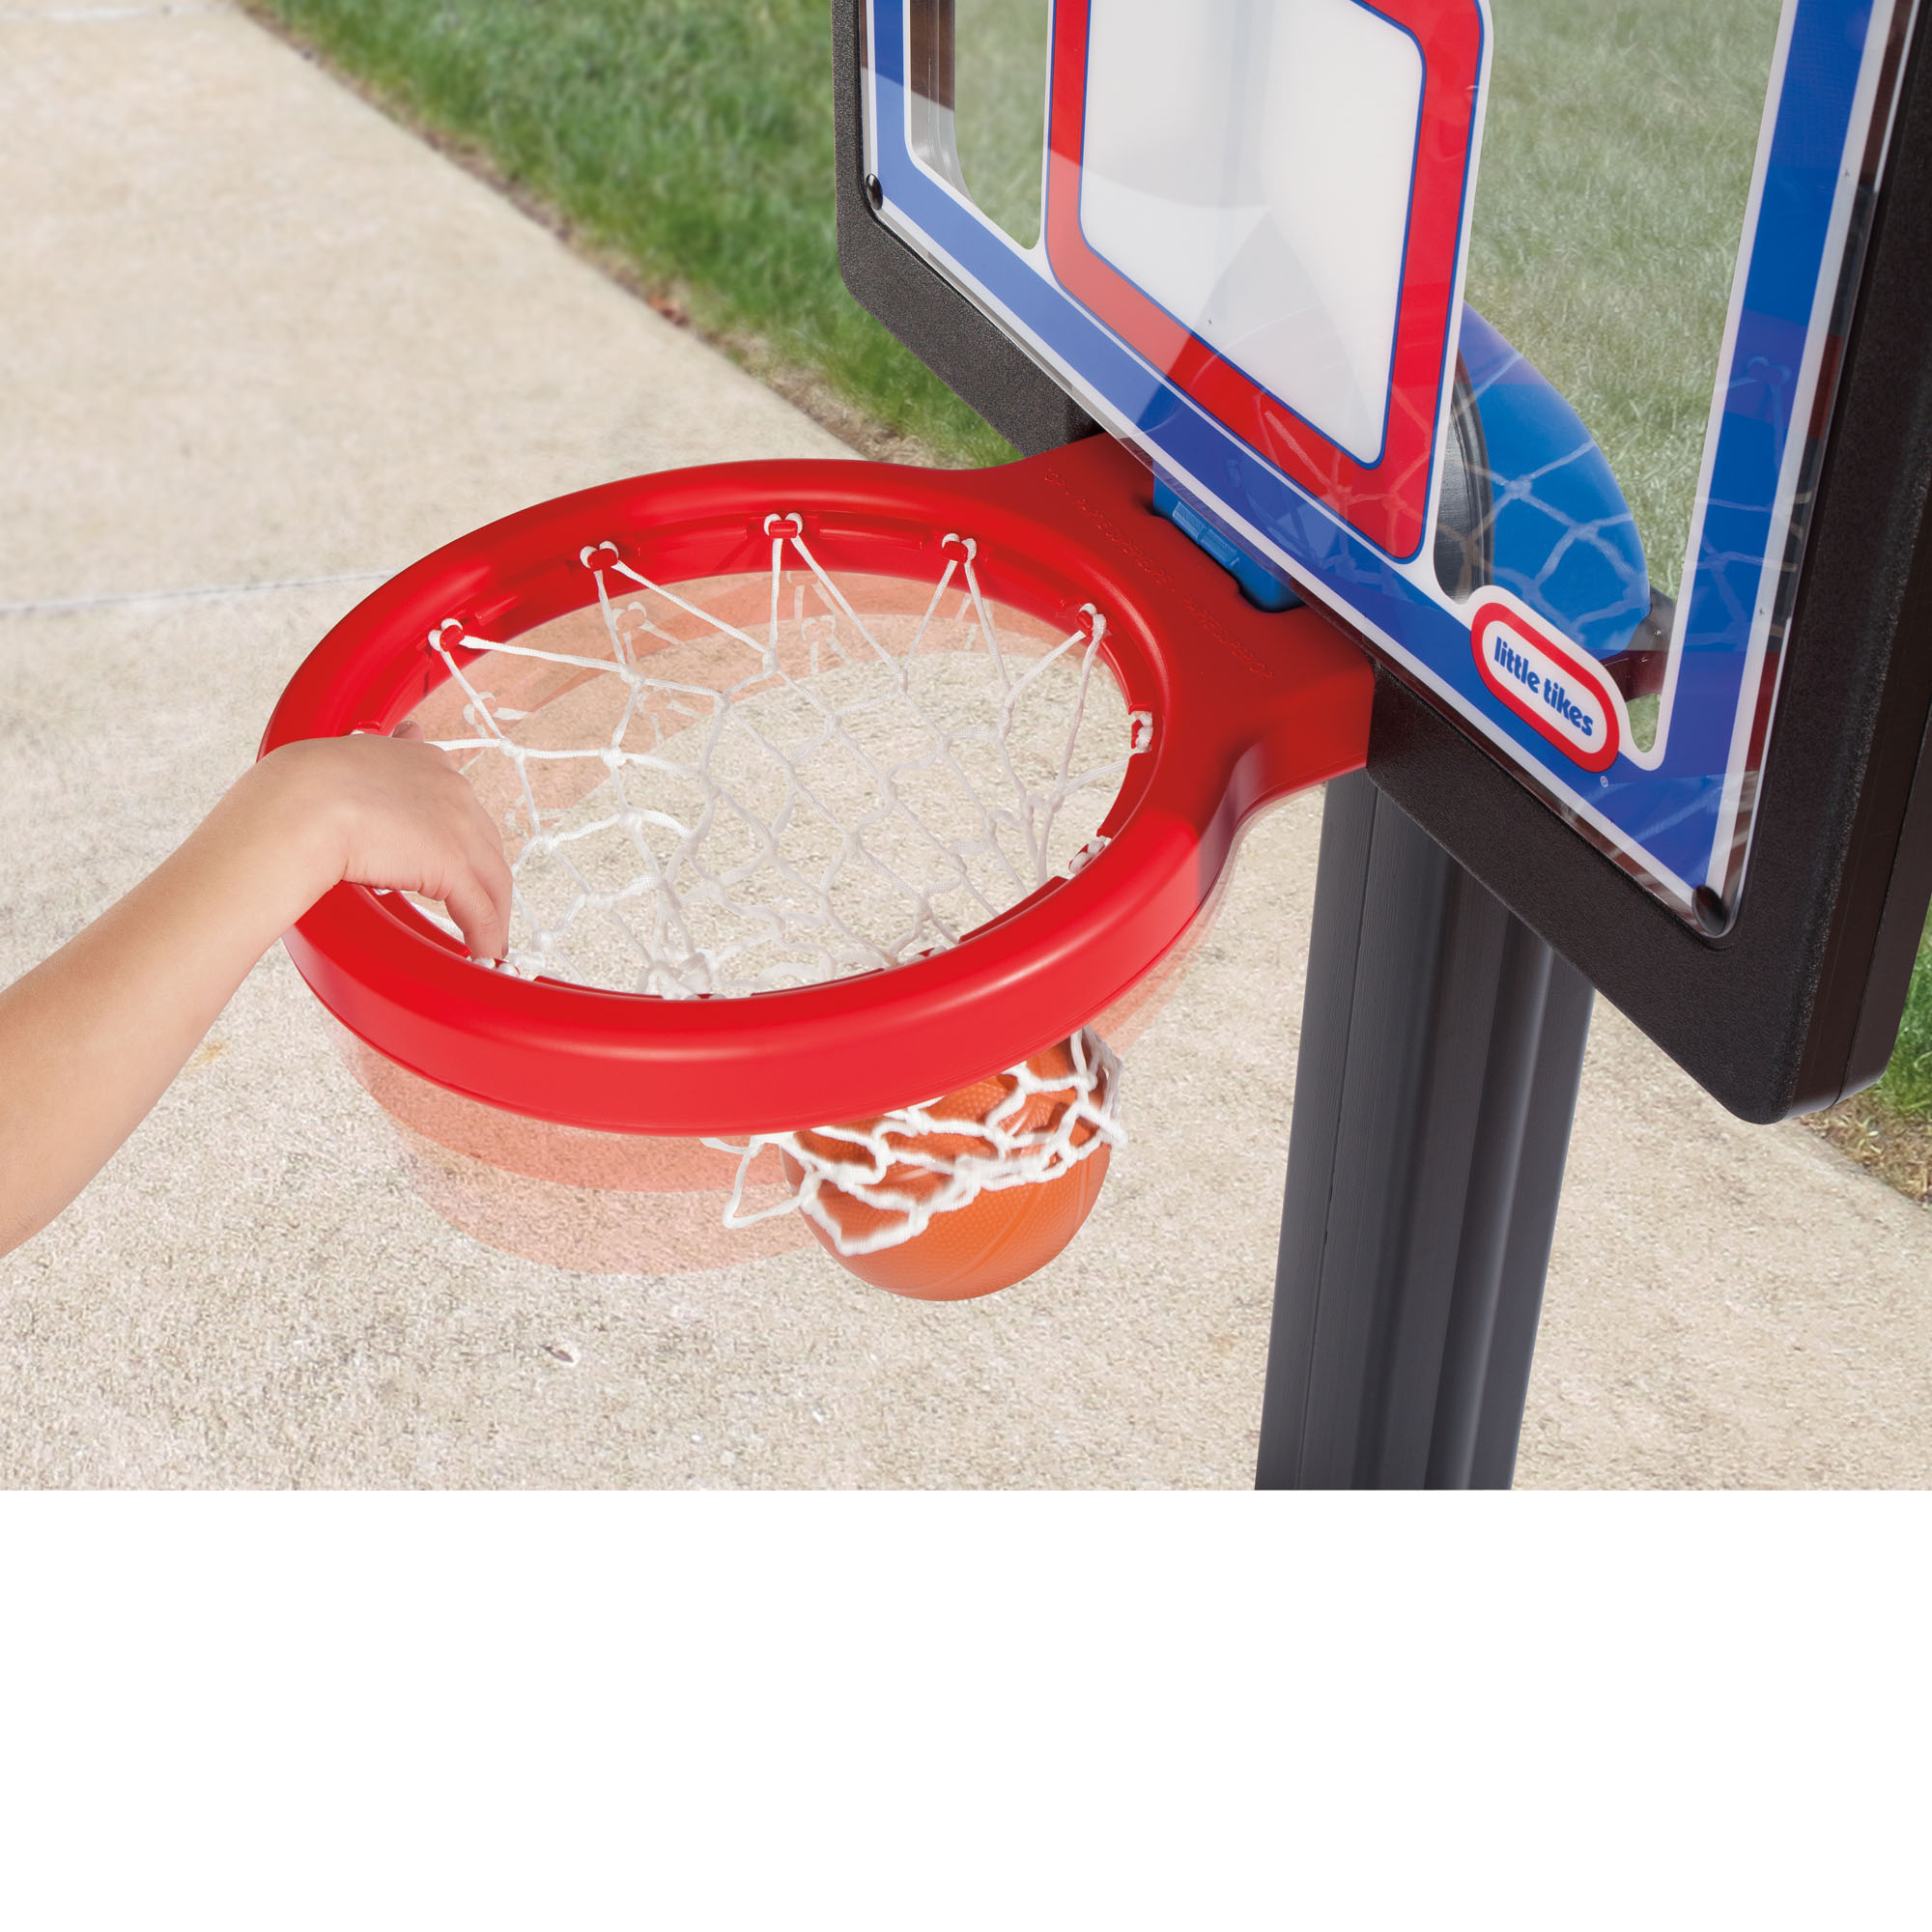 Little Tikes Play Pro Indoor Outdoor Kids Play Toy Portable Basketball Hoop Set - image 4 of 4